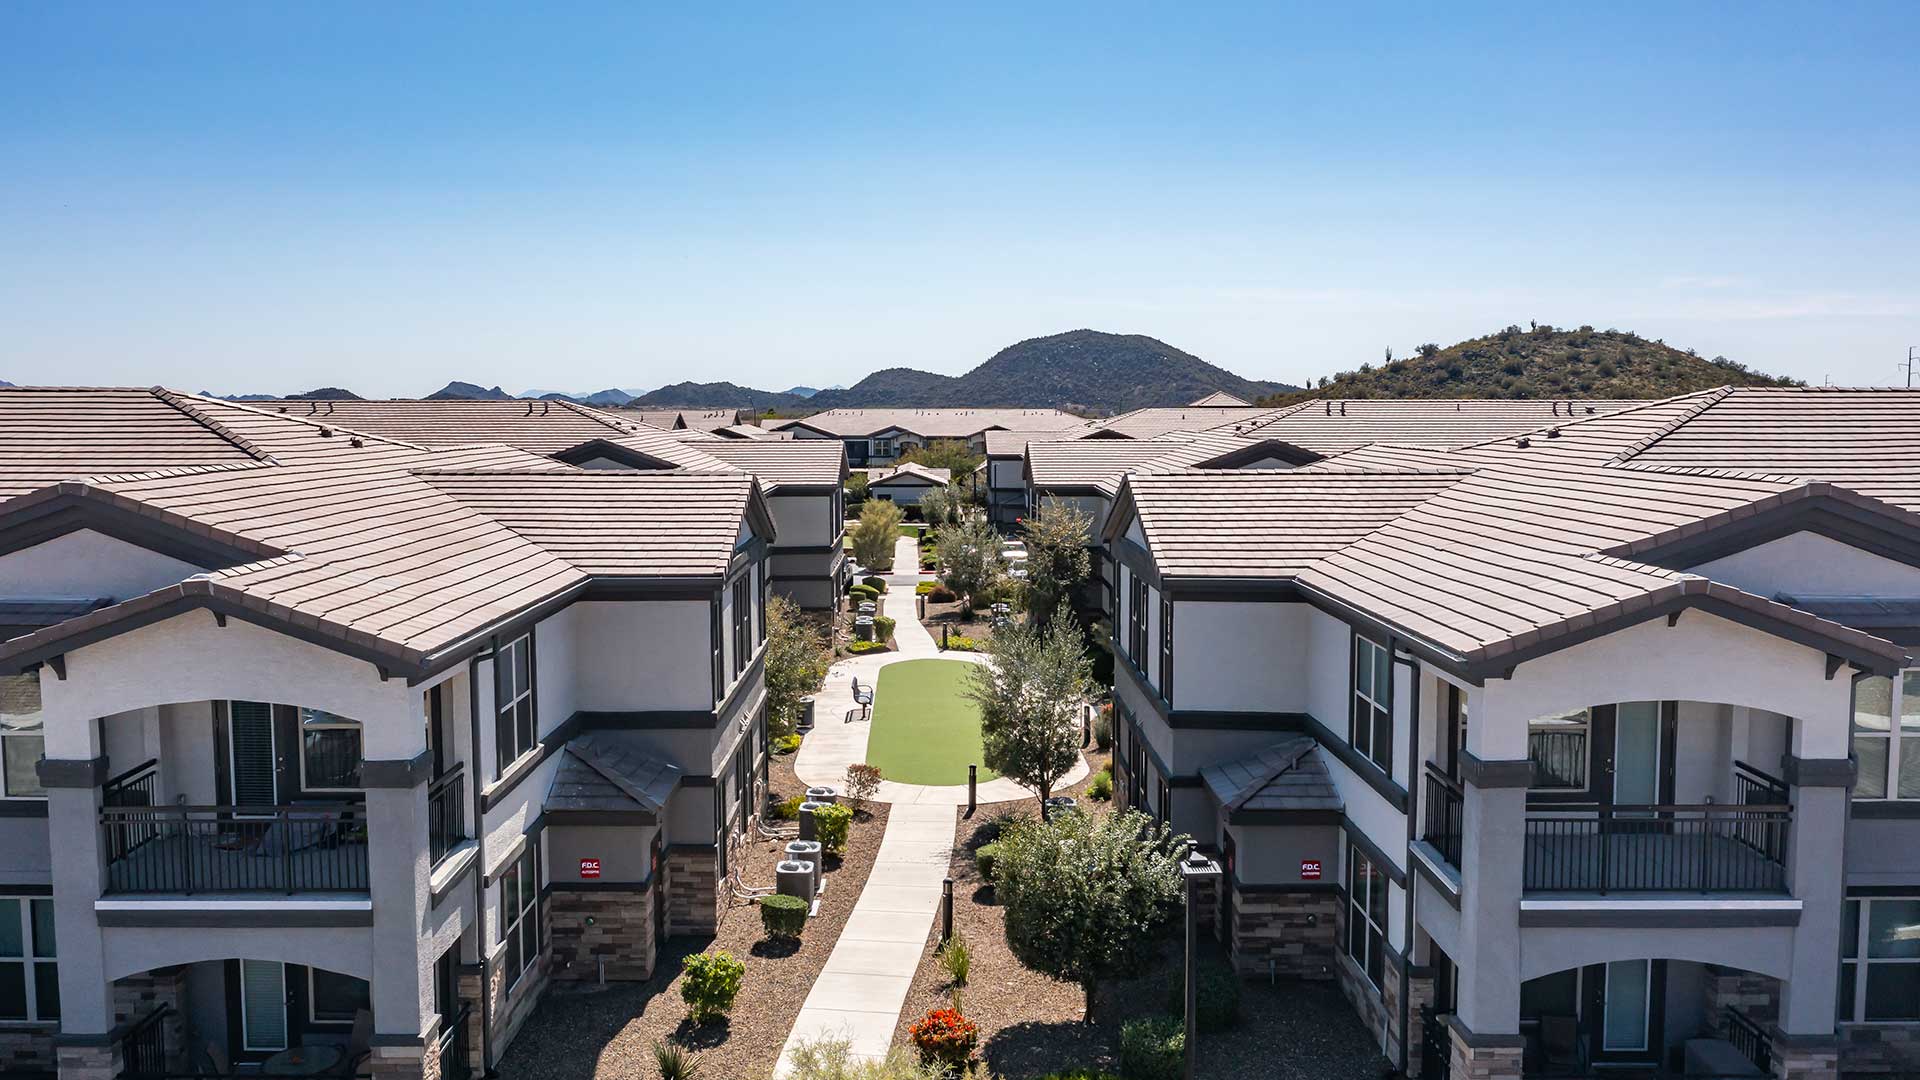 Aerial view of a modern residential complex with symmetrical buildings and a central garden in a hilly landscape.